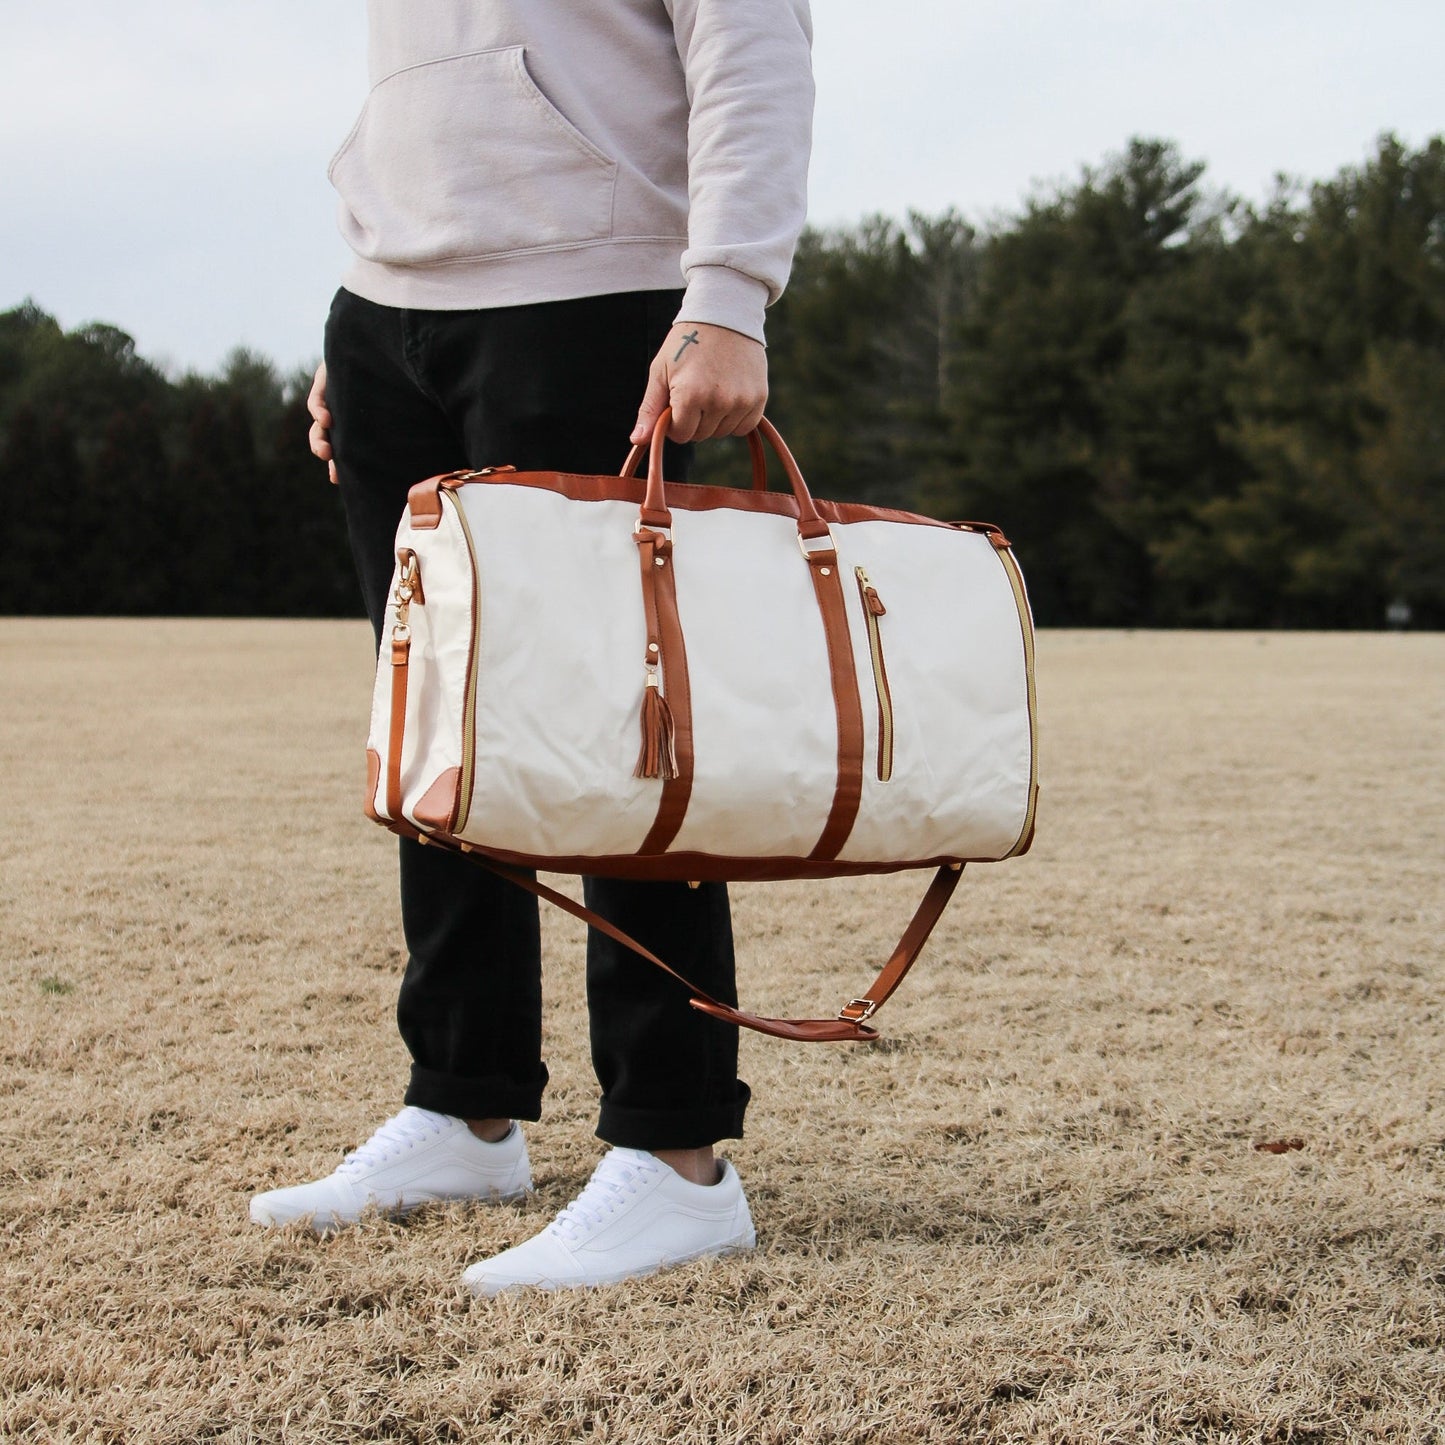 The Carry All - The Original Foldable Duffle